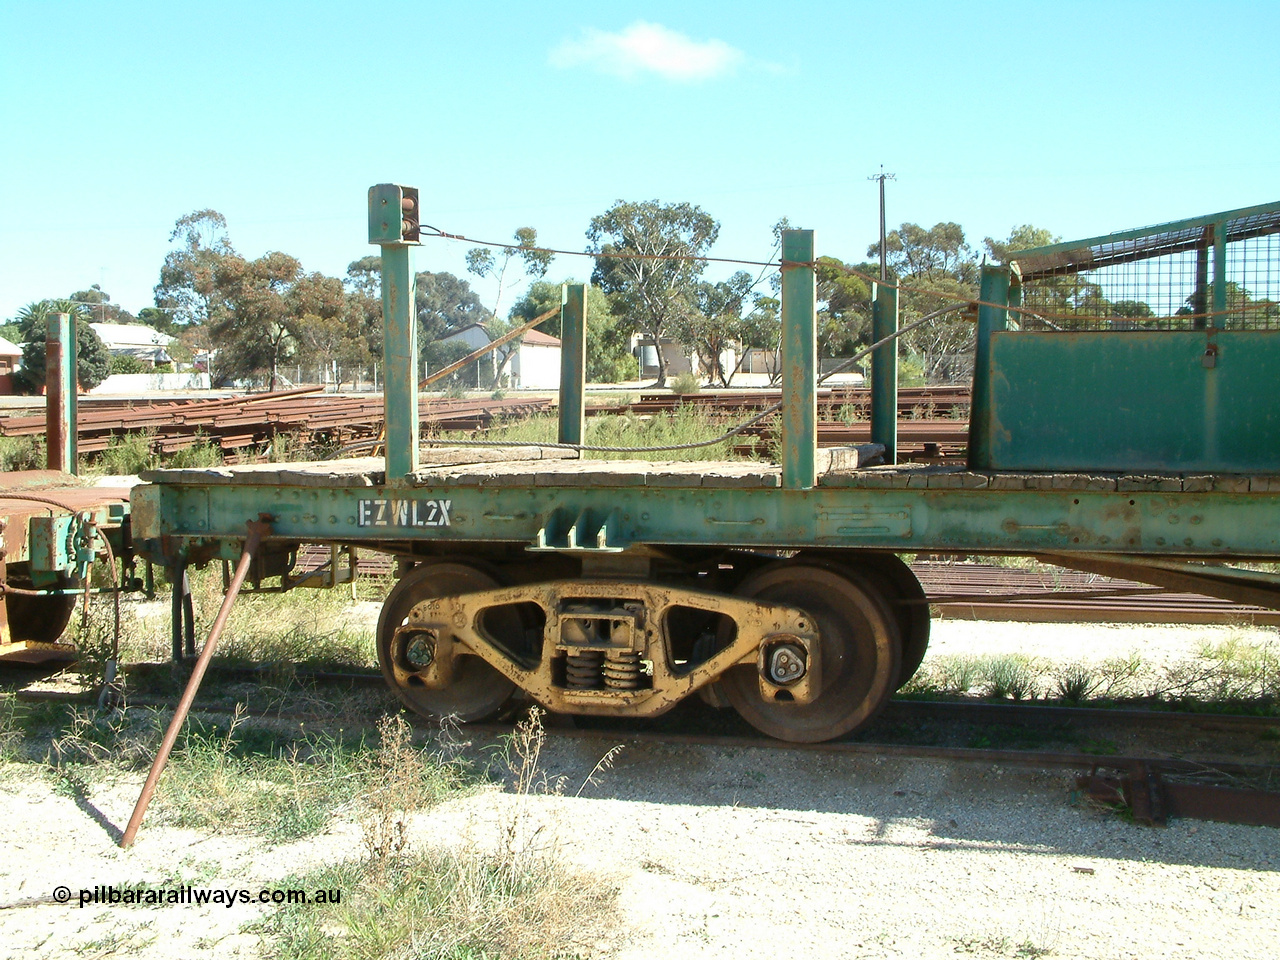 030411 110018
Kimba, rail recovery winch waggon EZWL 2, built using underframe of broad gauge horse box BH 4331. To Eyre Peninsula 1992, recoded then from AZWL.
Keywords: EZWL-type;EZWL2;SAR-Islington-WS;BH-type;BH4331;